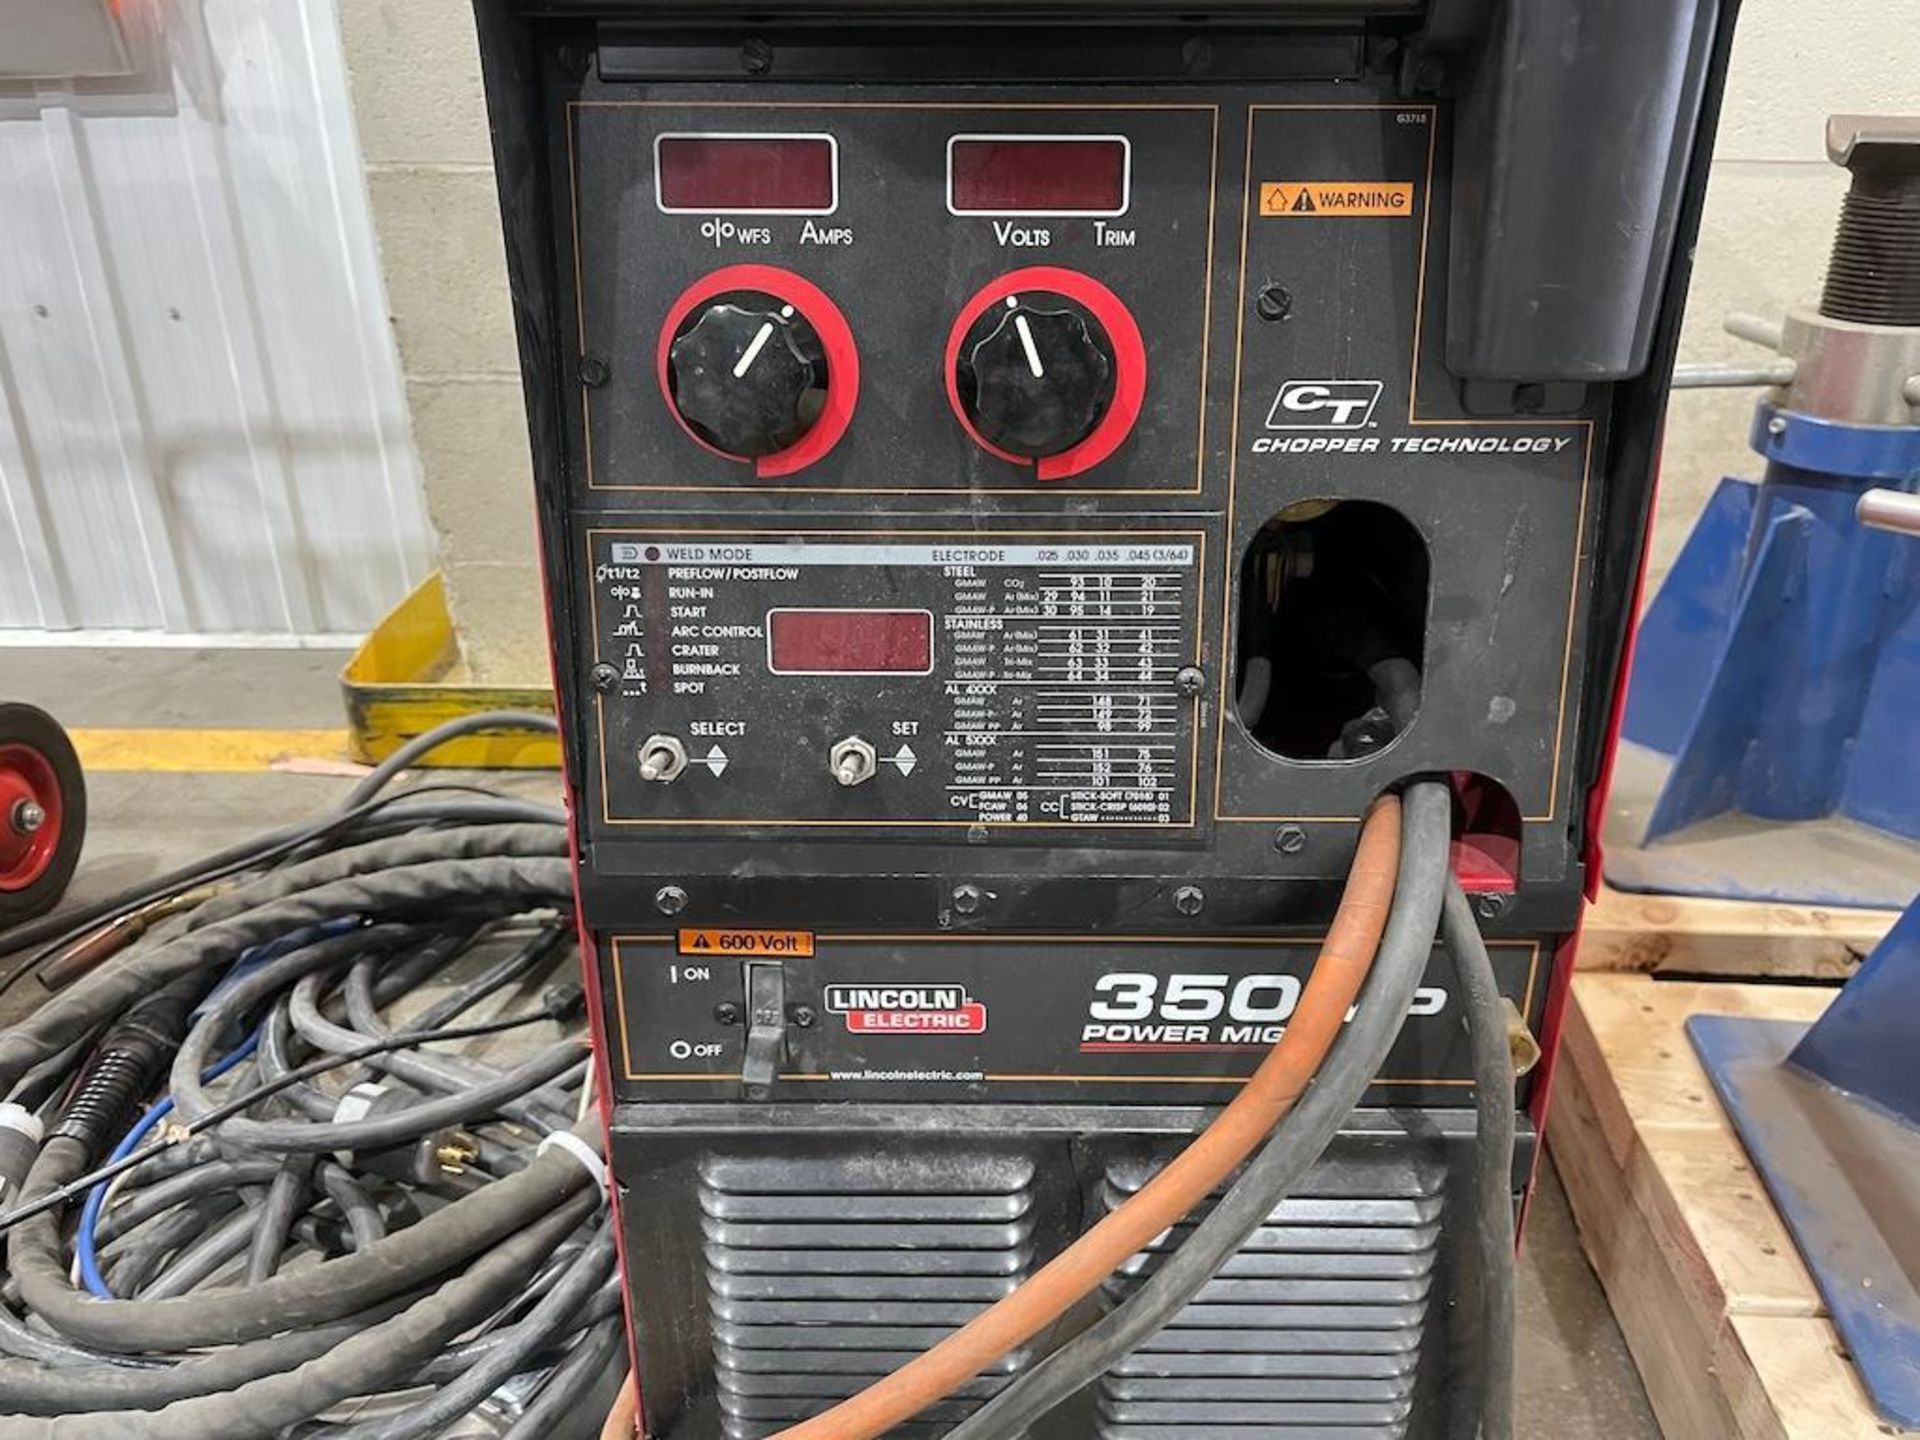 LINCOLN ELECTRIC POWER MIG 350MP W COOL ARC 40 CHILLER UNIT, CABLES, GUN [TROIS RIVIERES] *PLEASE NO - Image 2 of 2